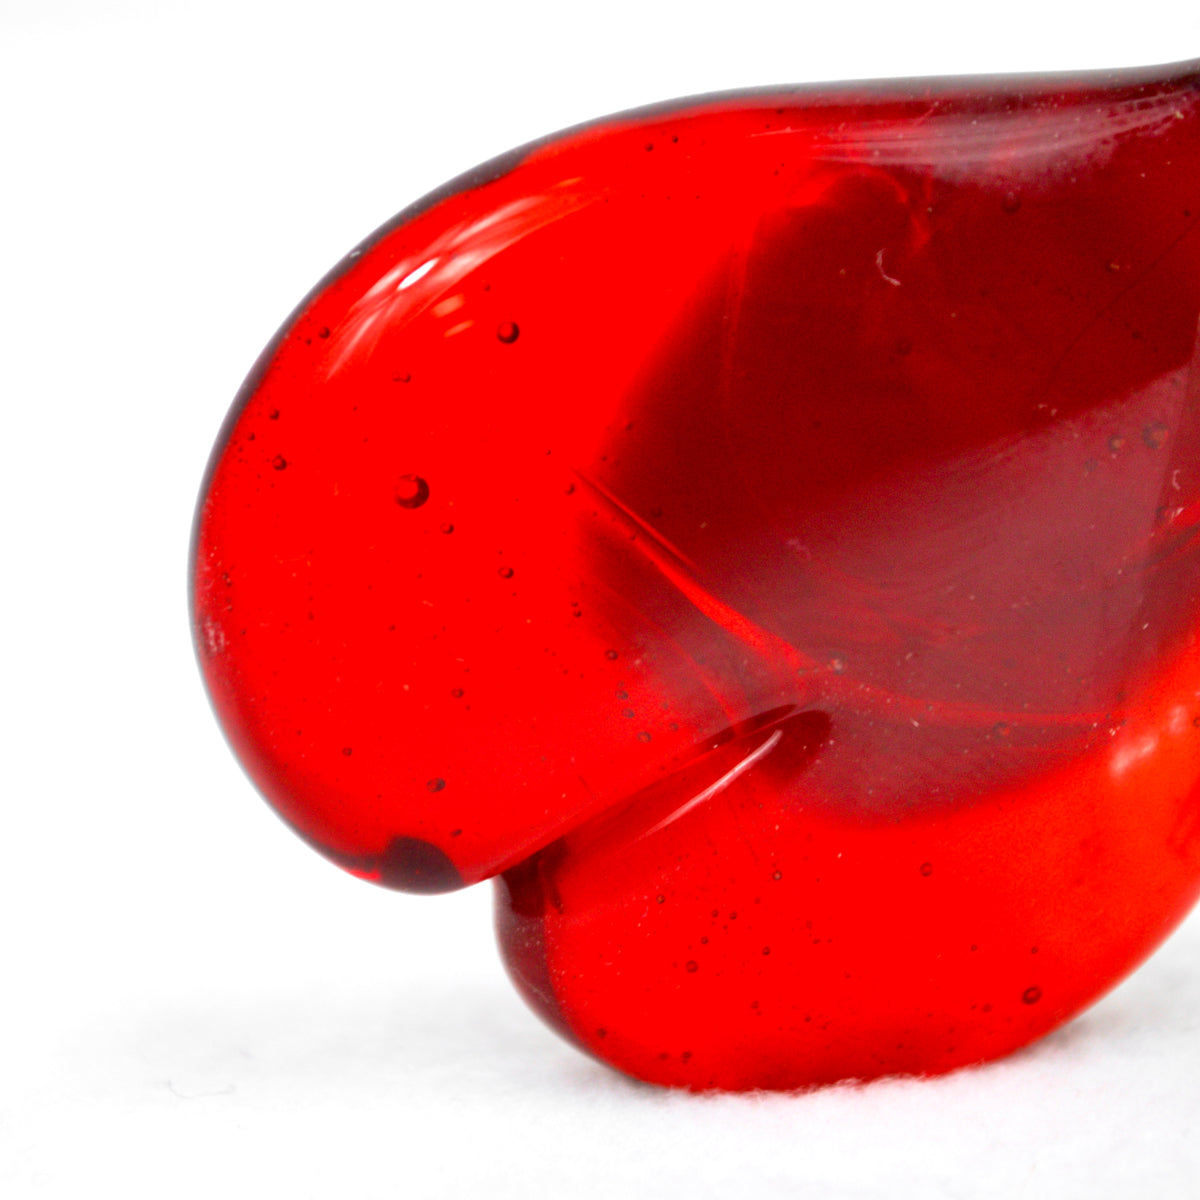 Murano Glass Red Heart Sculpture, Figurine, Paperweight on cube shaped base - My Italian Decor